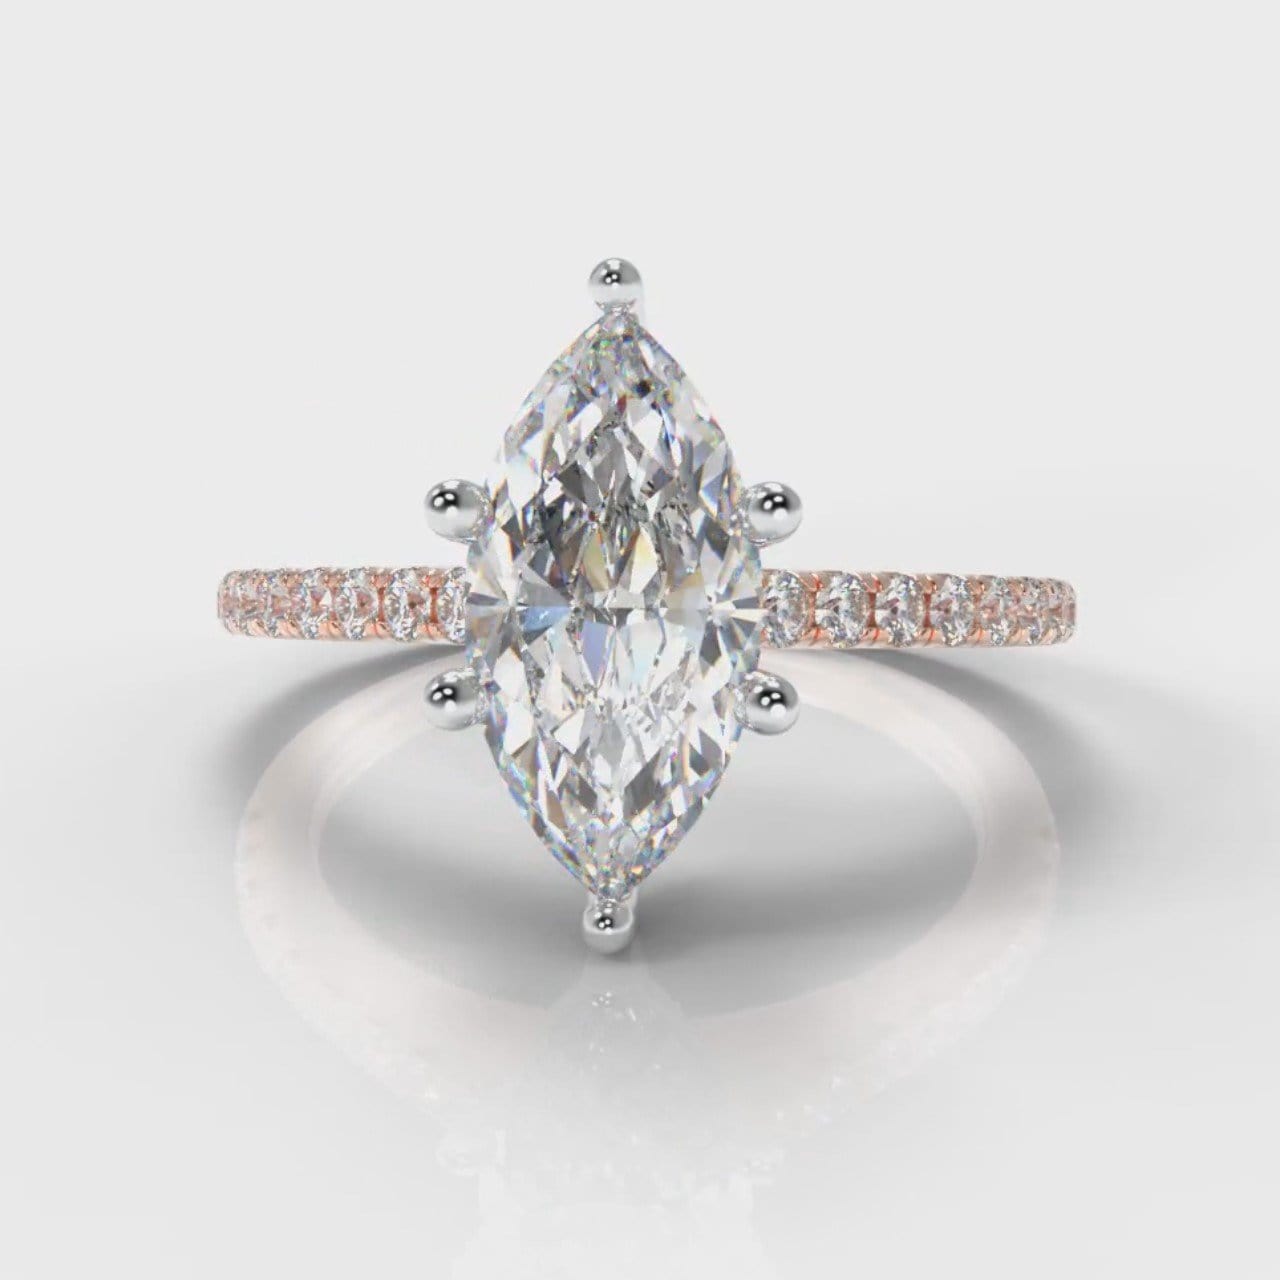 Star Petite Micropavé Marquise Diamond Engagement Ring - Rose Gold